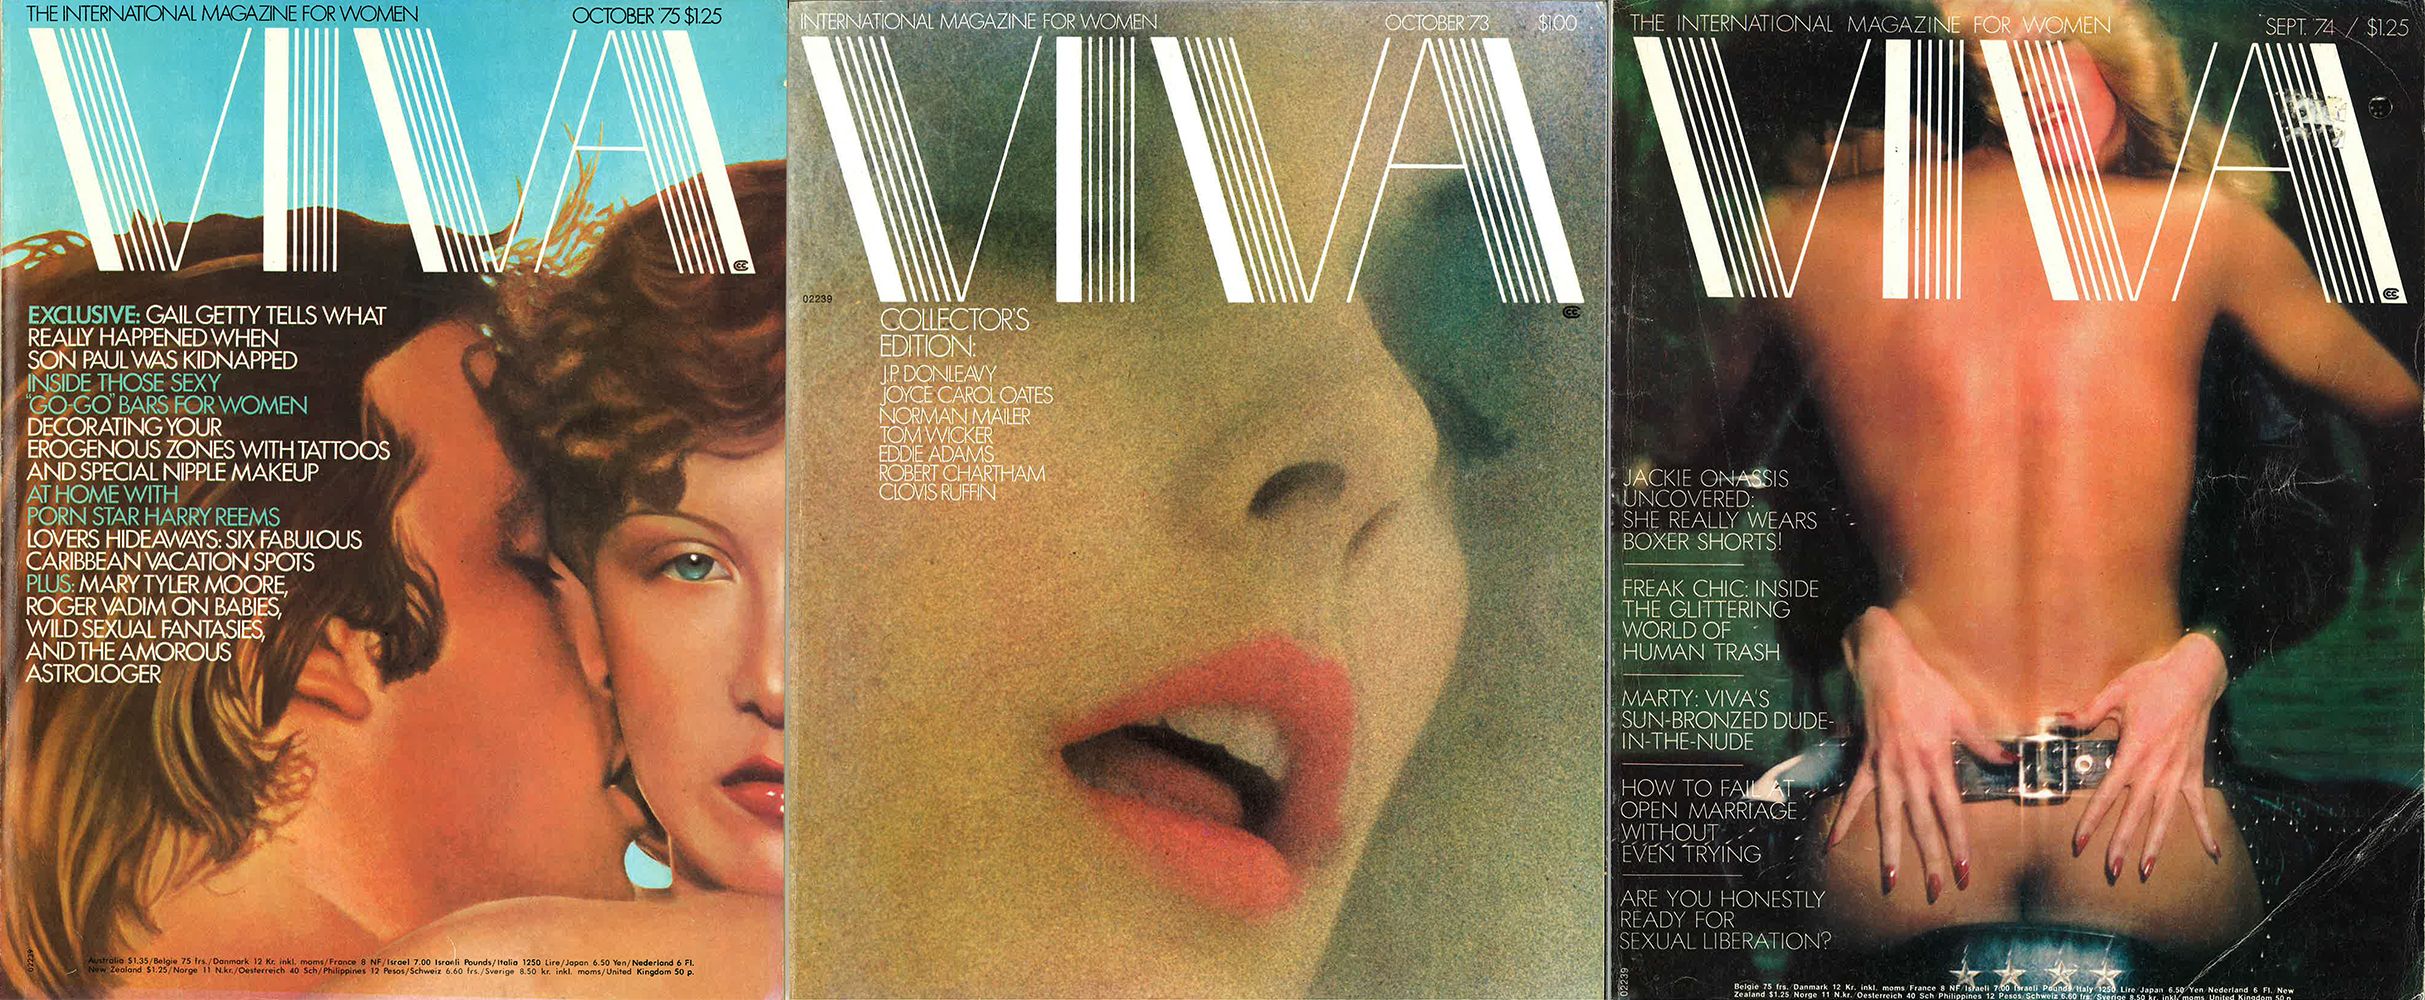 Vintage Chic Porn Magazines - An Oral History of Viva, the '70s Porn Magazine for Women